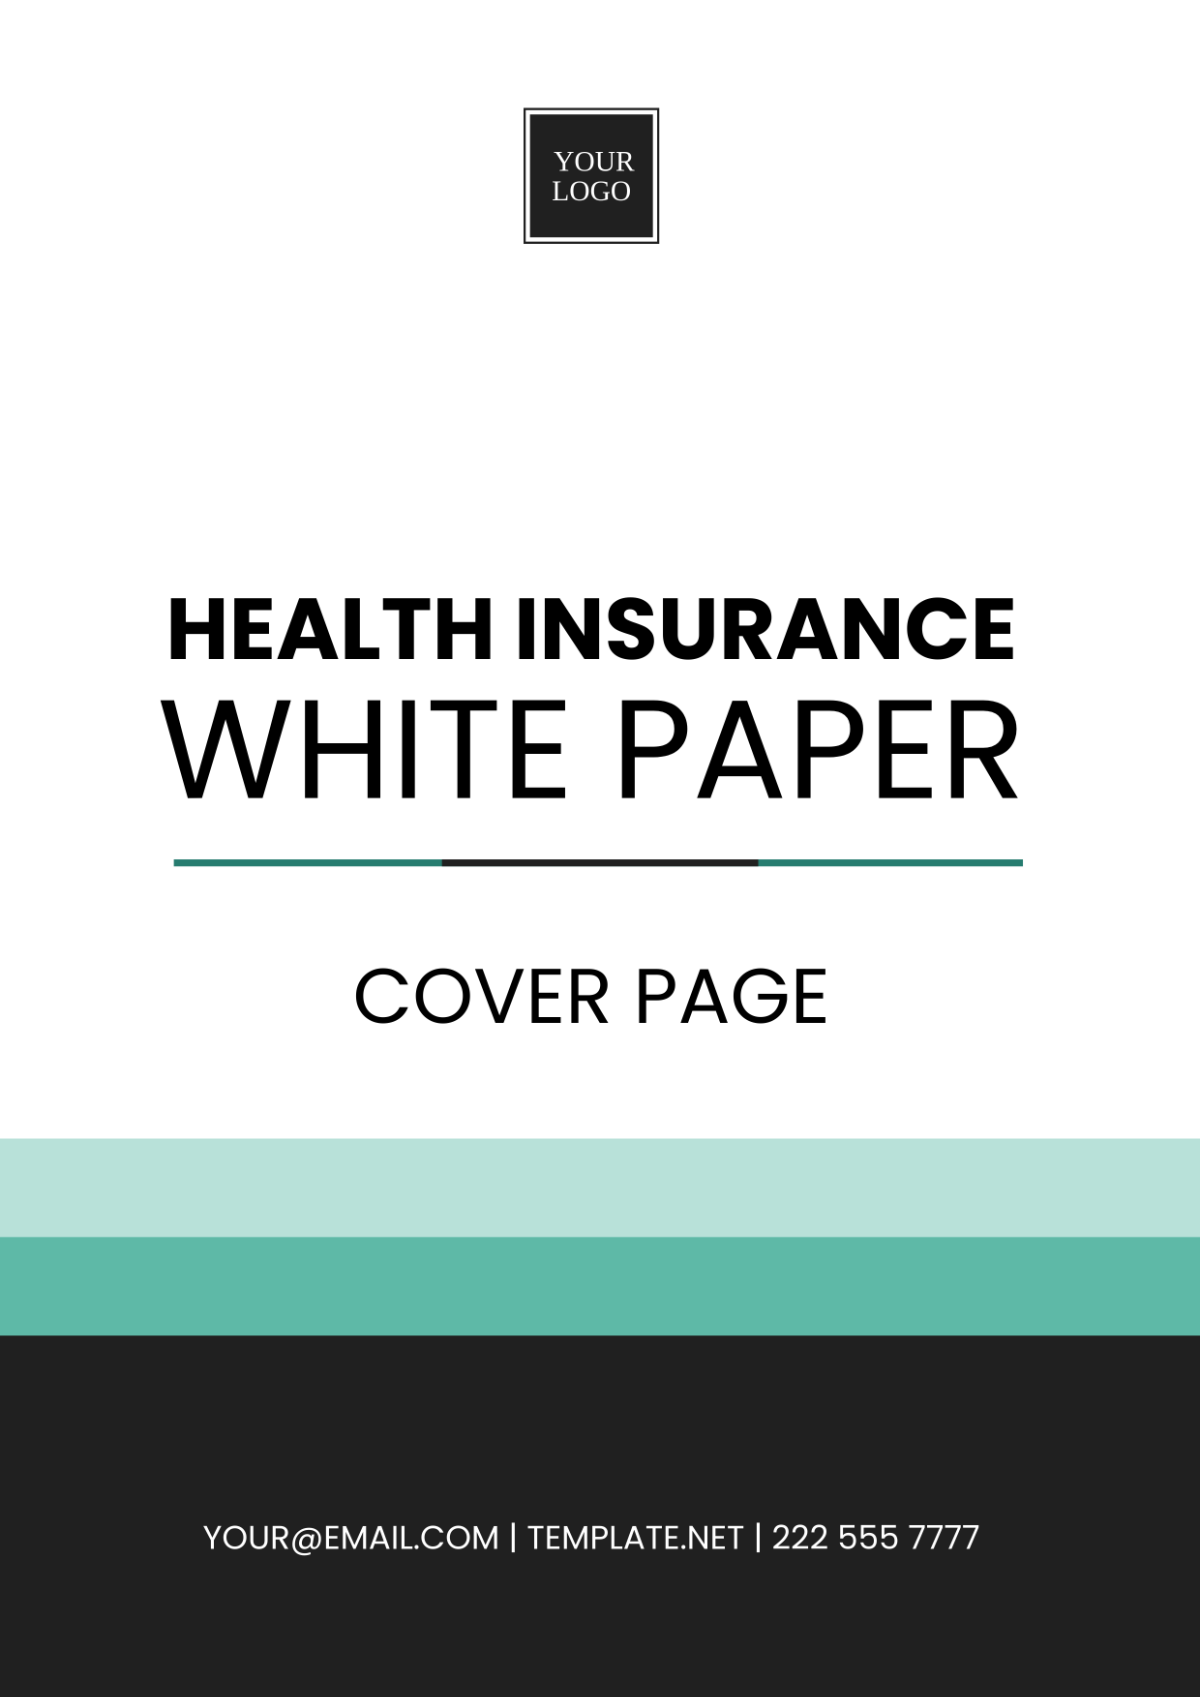 Health Insurance White Paper Cover Page